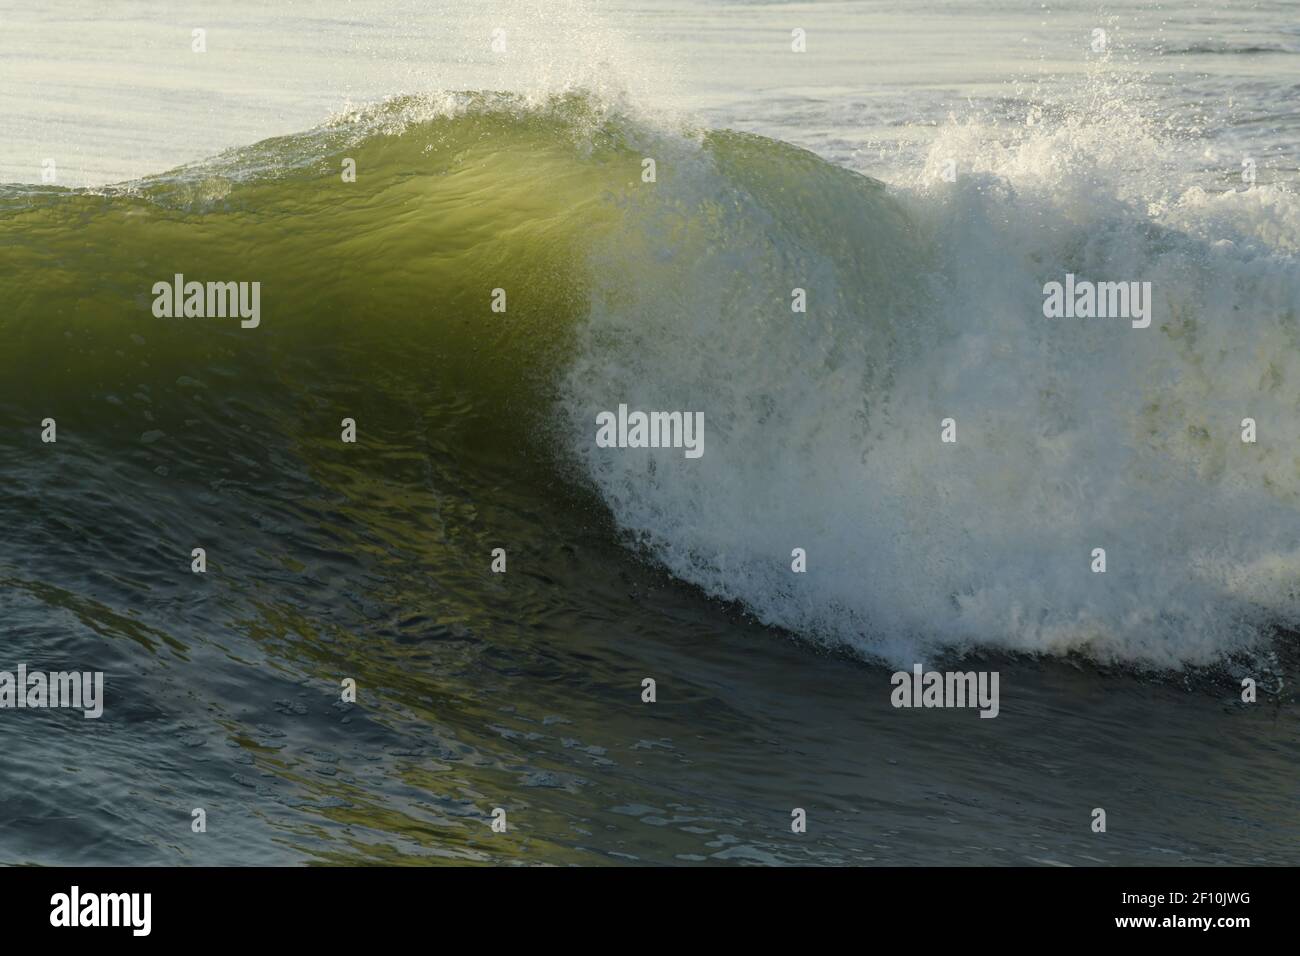 Wave crashing, seascape, waves close up, water energy, force of nature, backgrounds, grunge, concepts, Durban, South Africa, motion, movement, sea Stock Photo